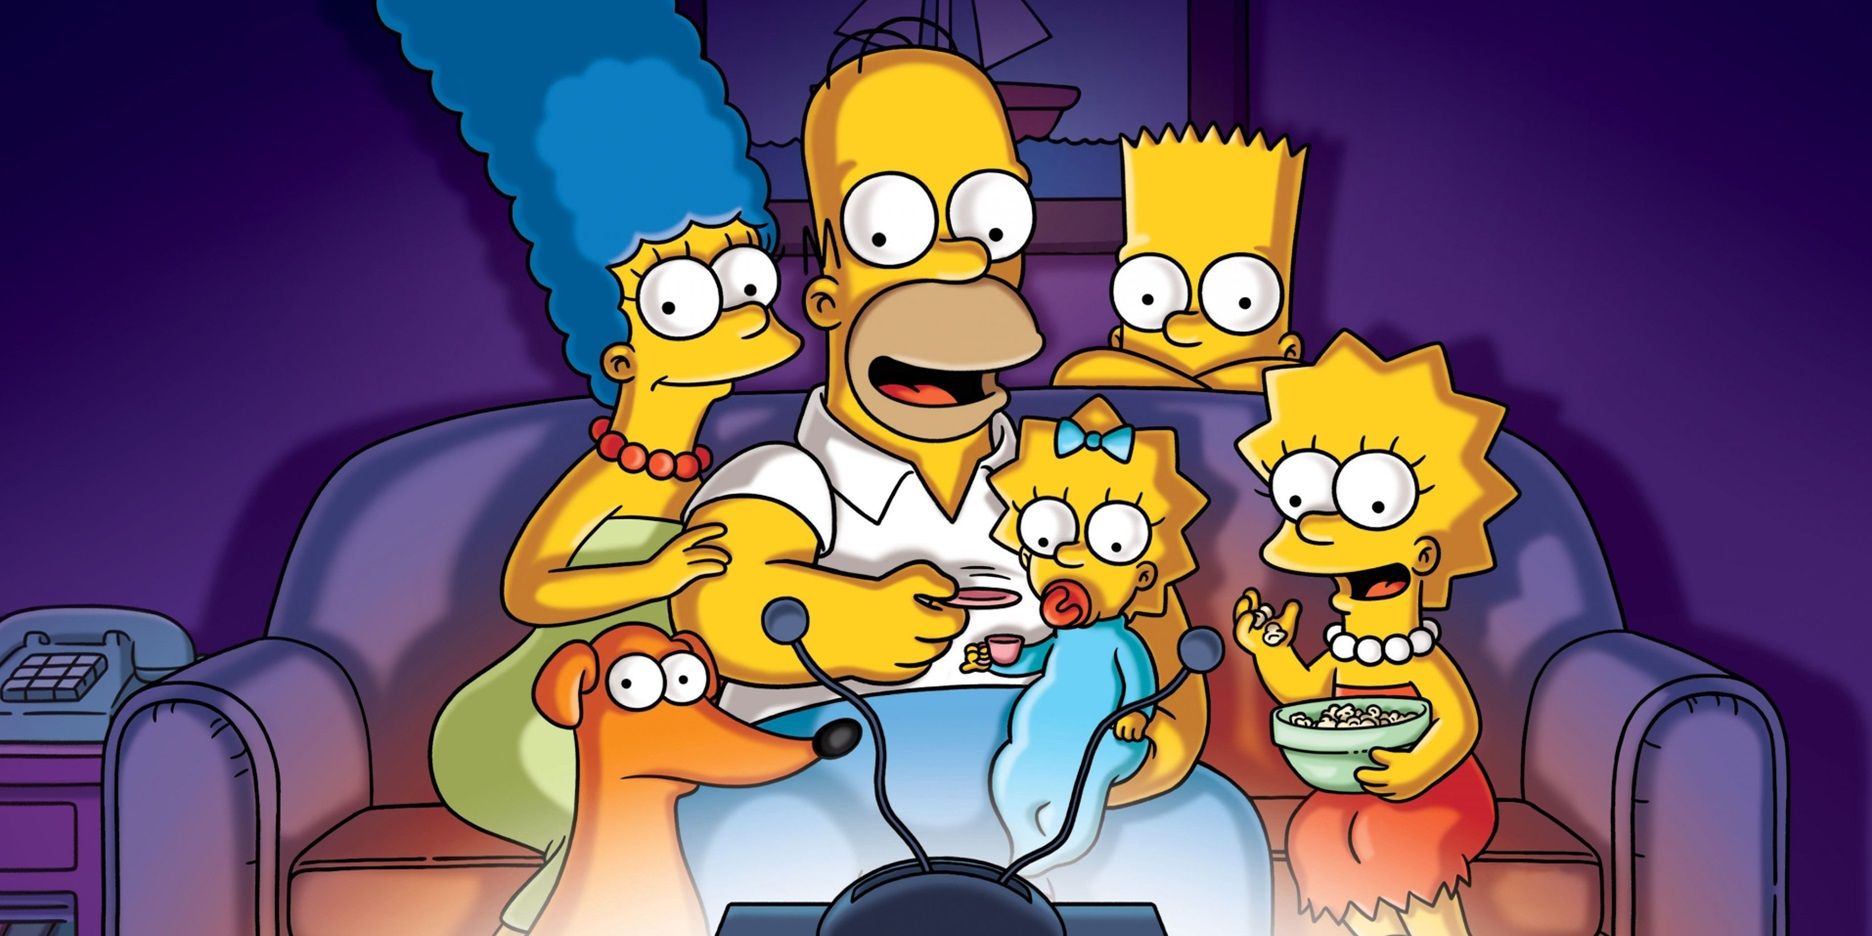 The Simpsons watching TV